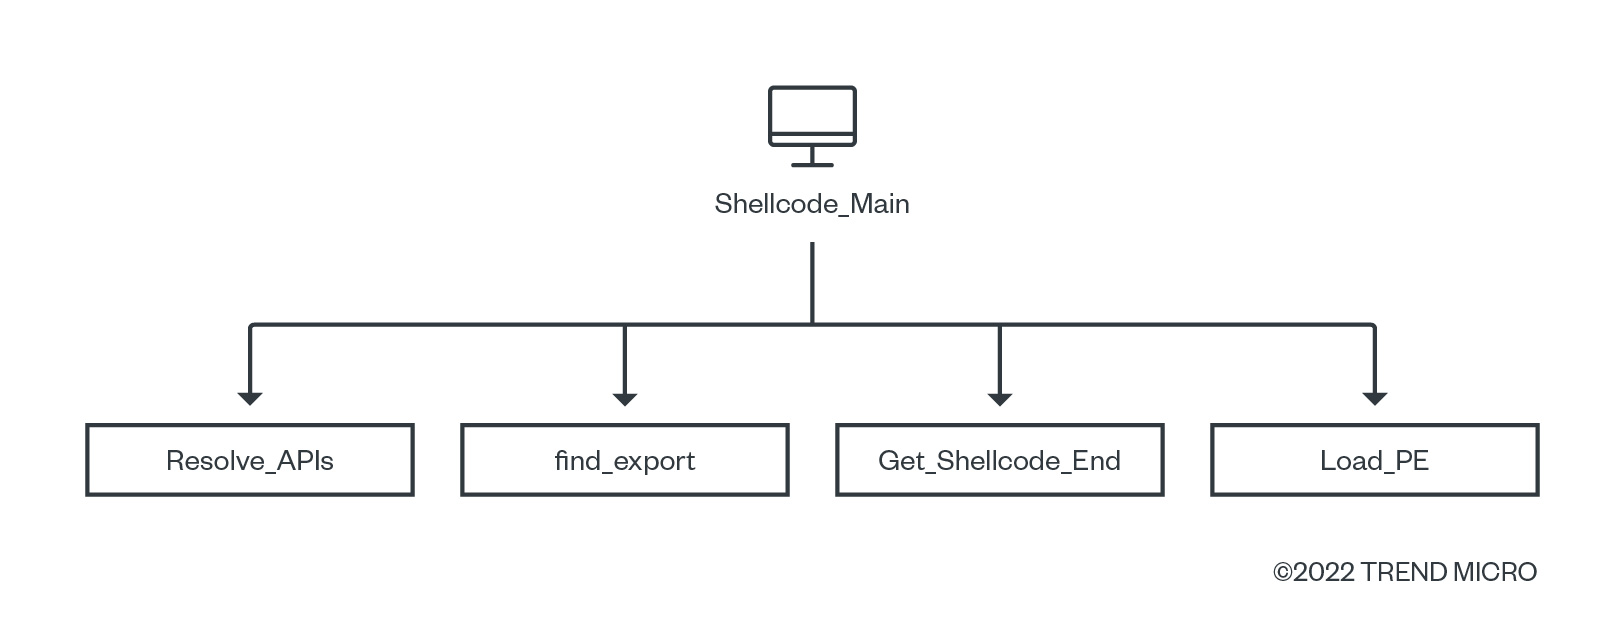 Figure 4. Shellcode main functions for loading a PE module in memory